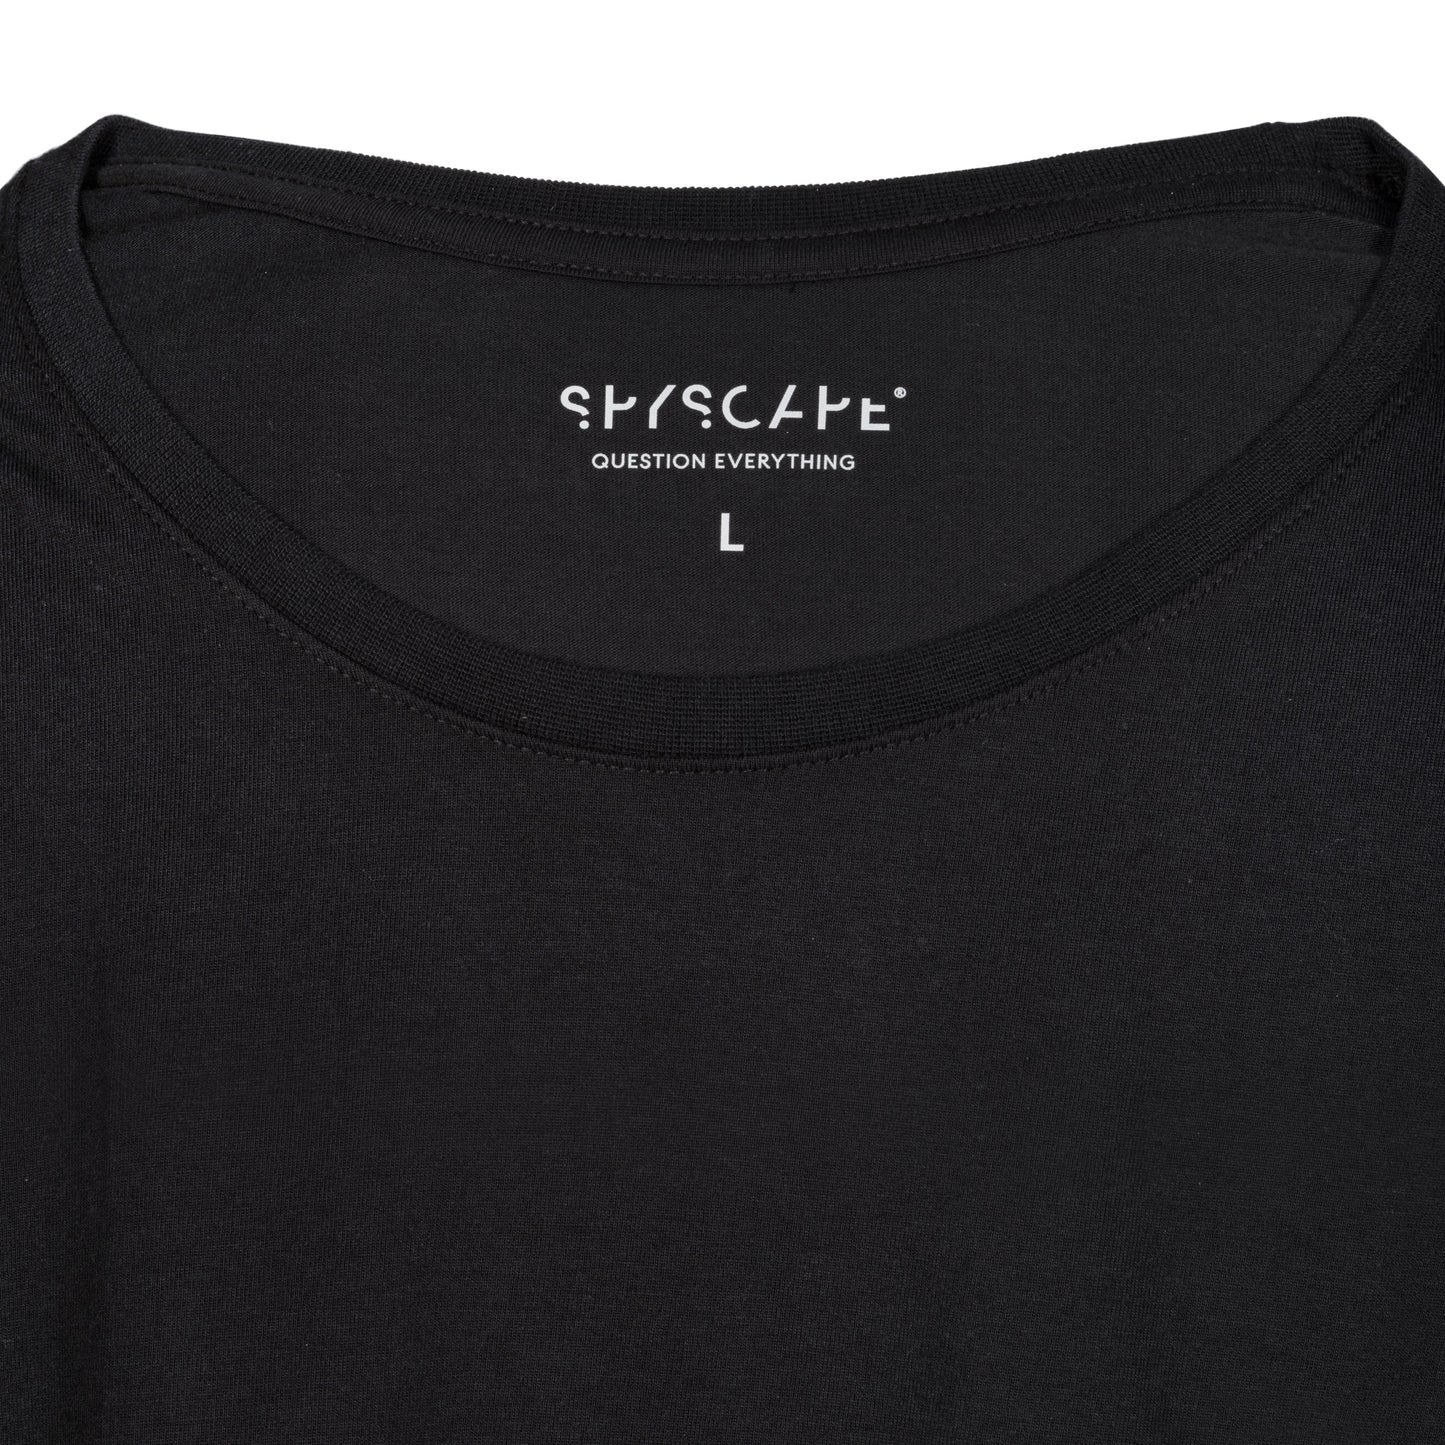 SPYSCAPE Hacker T- Shirt with Hidden Zip Pocket - inner neck print SPYSCAPE Question Everything and size